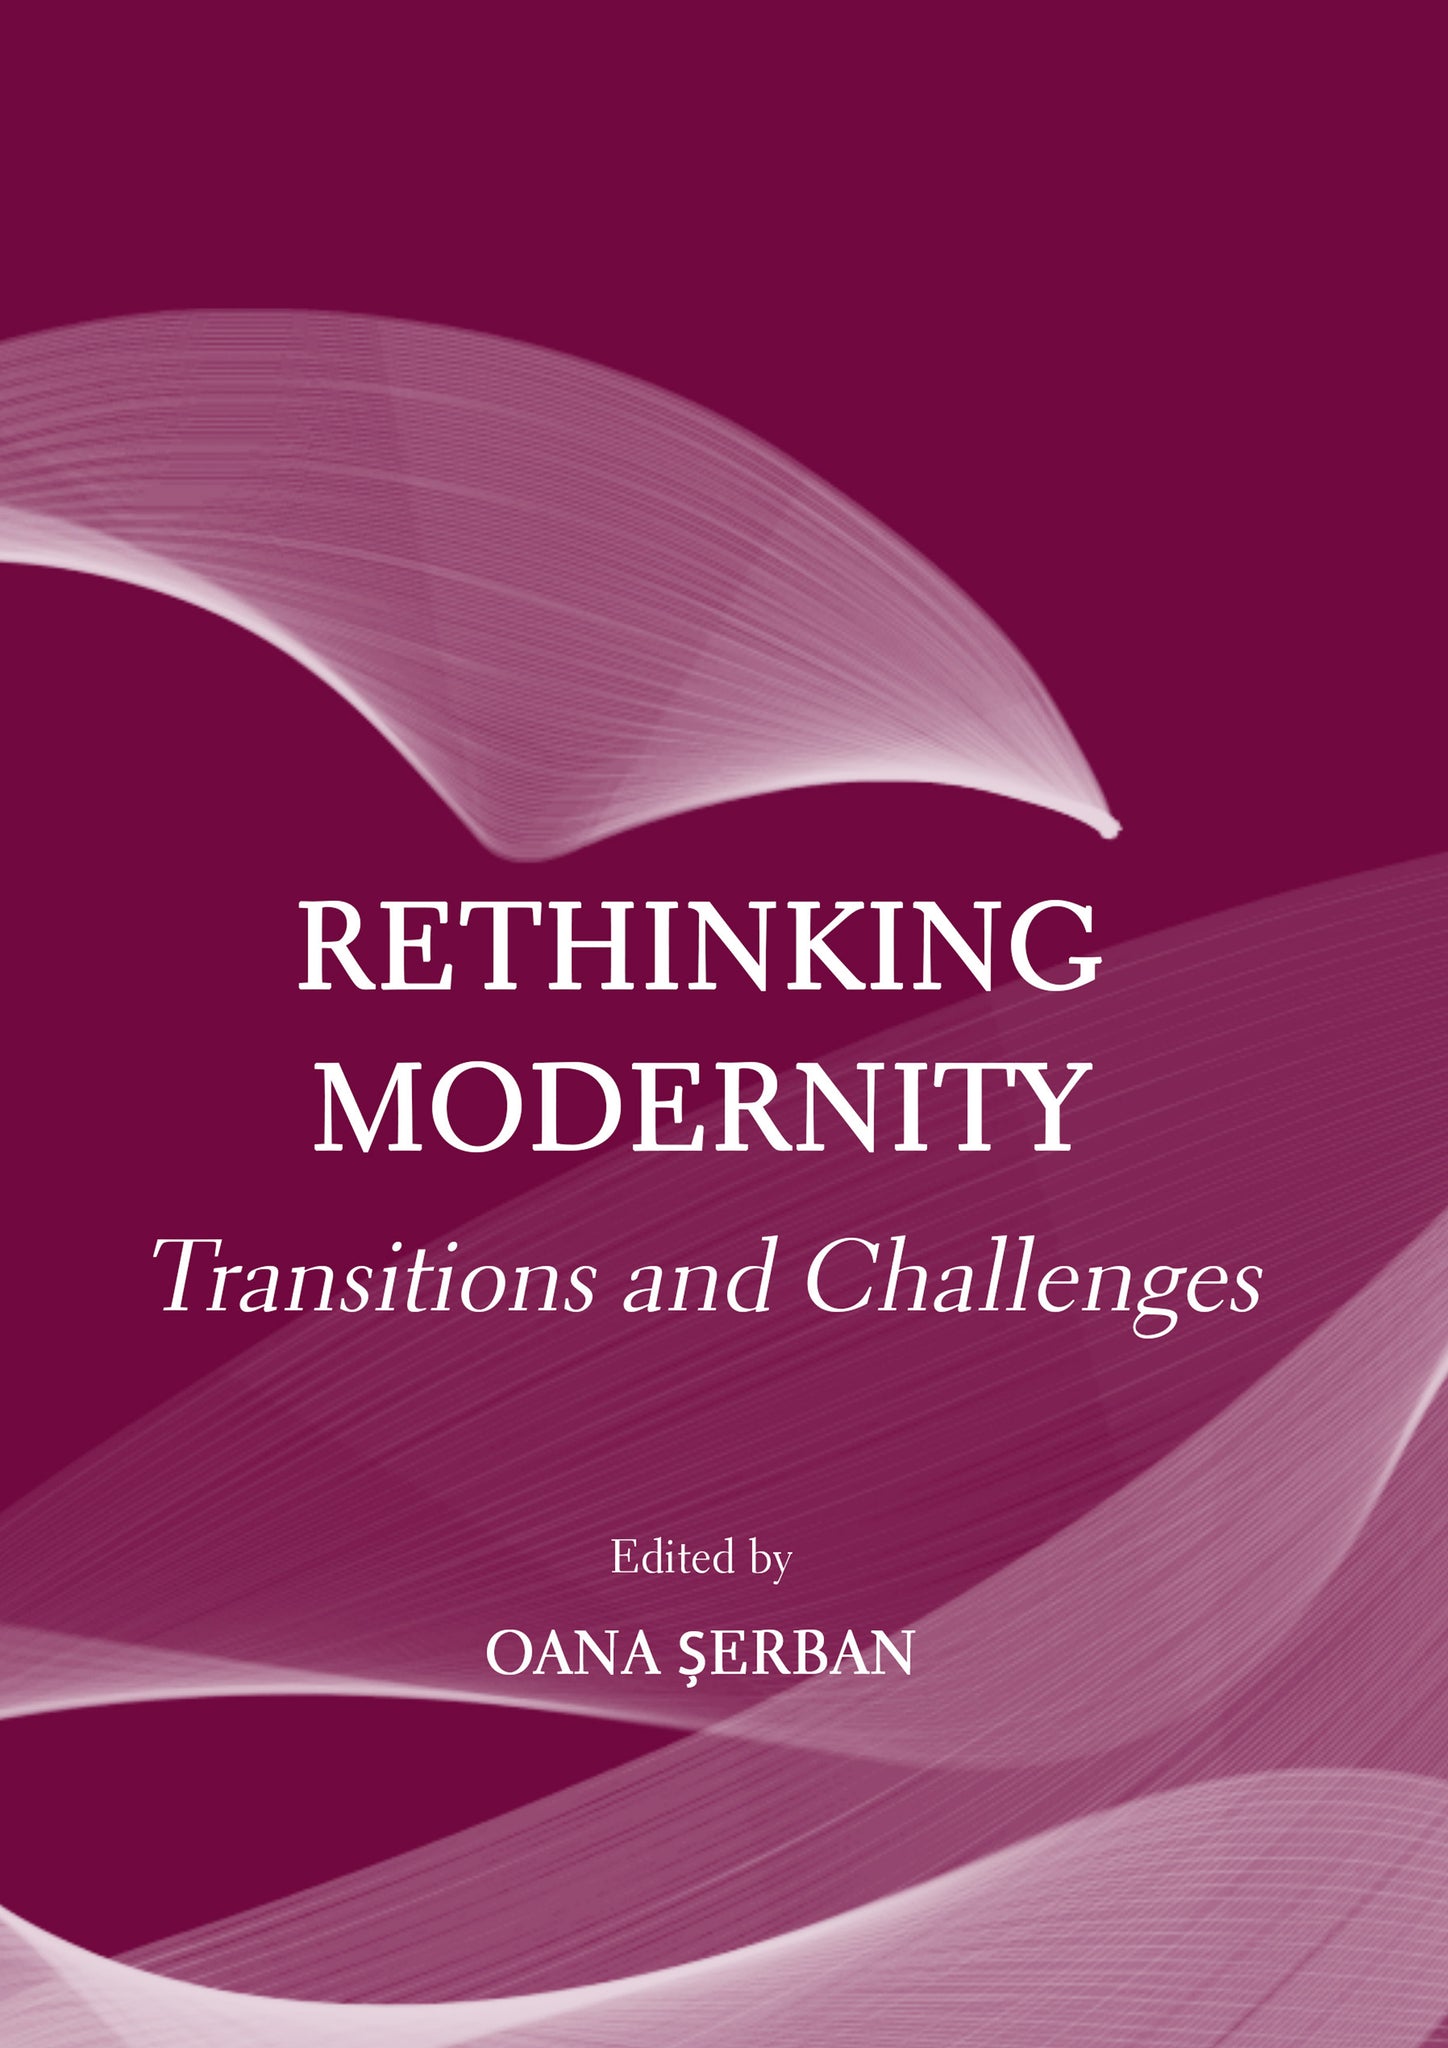 Rethinking Modernity: Transitions and Challenges